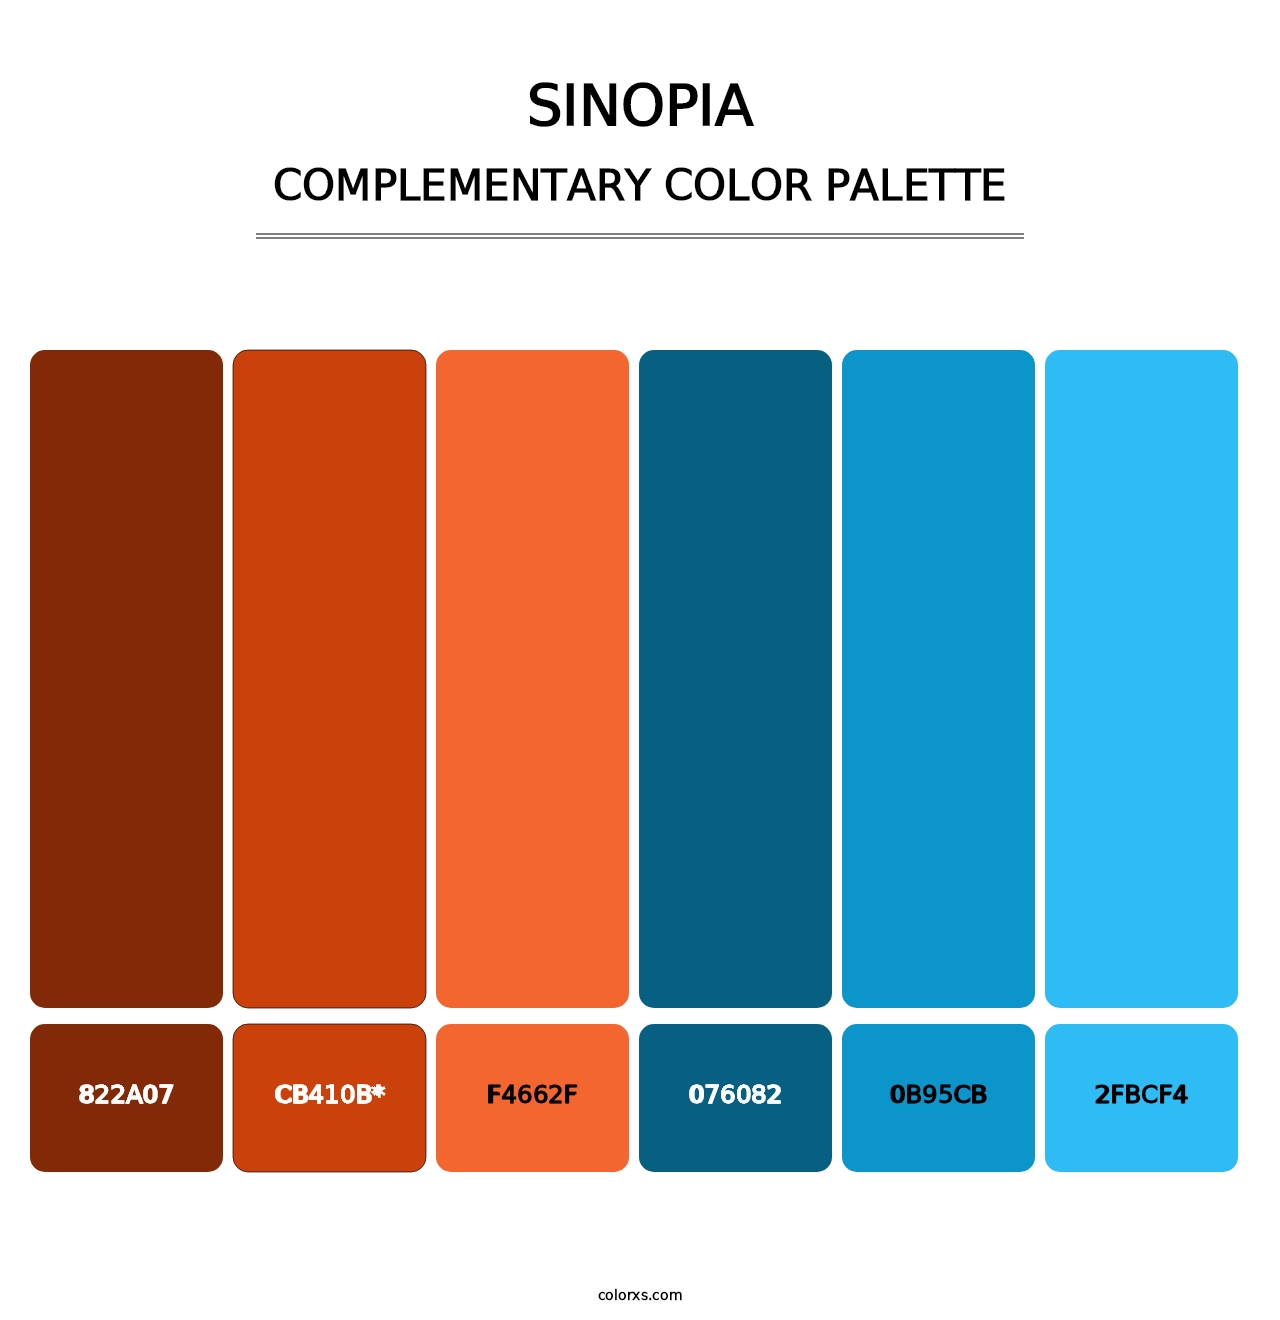 Sinopia - Complementary Color Palette